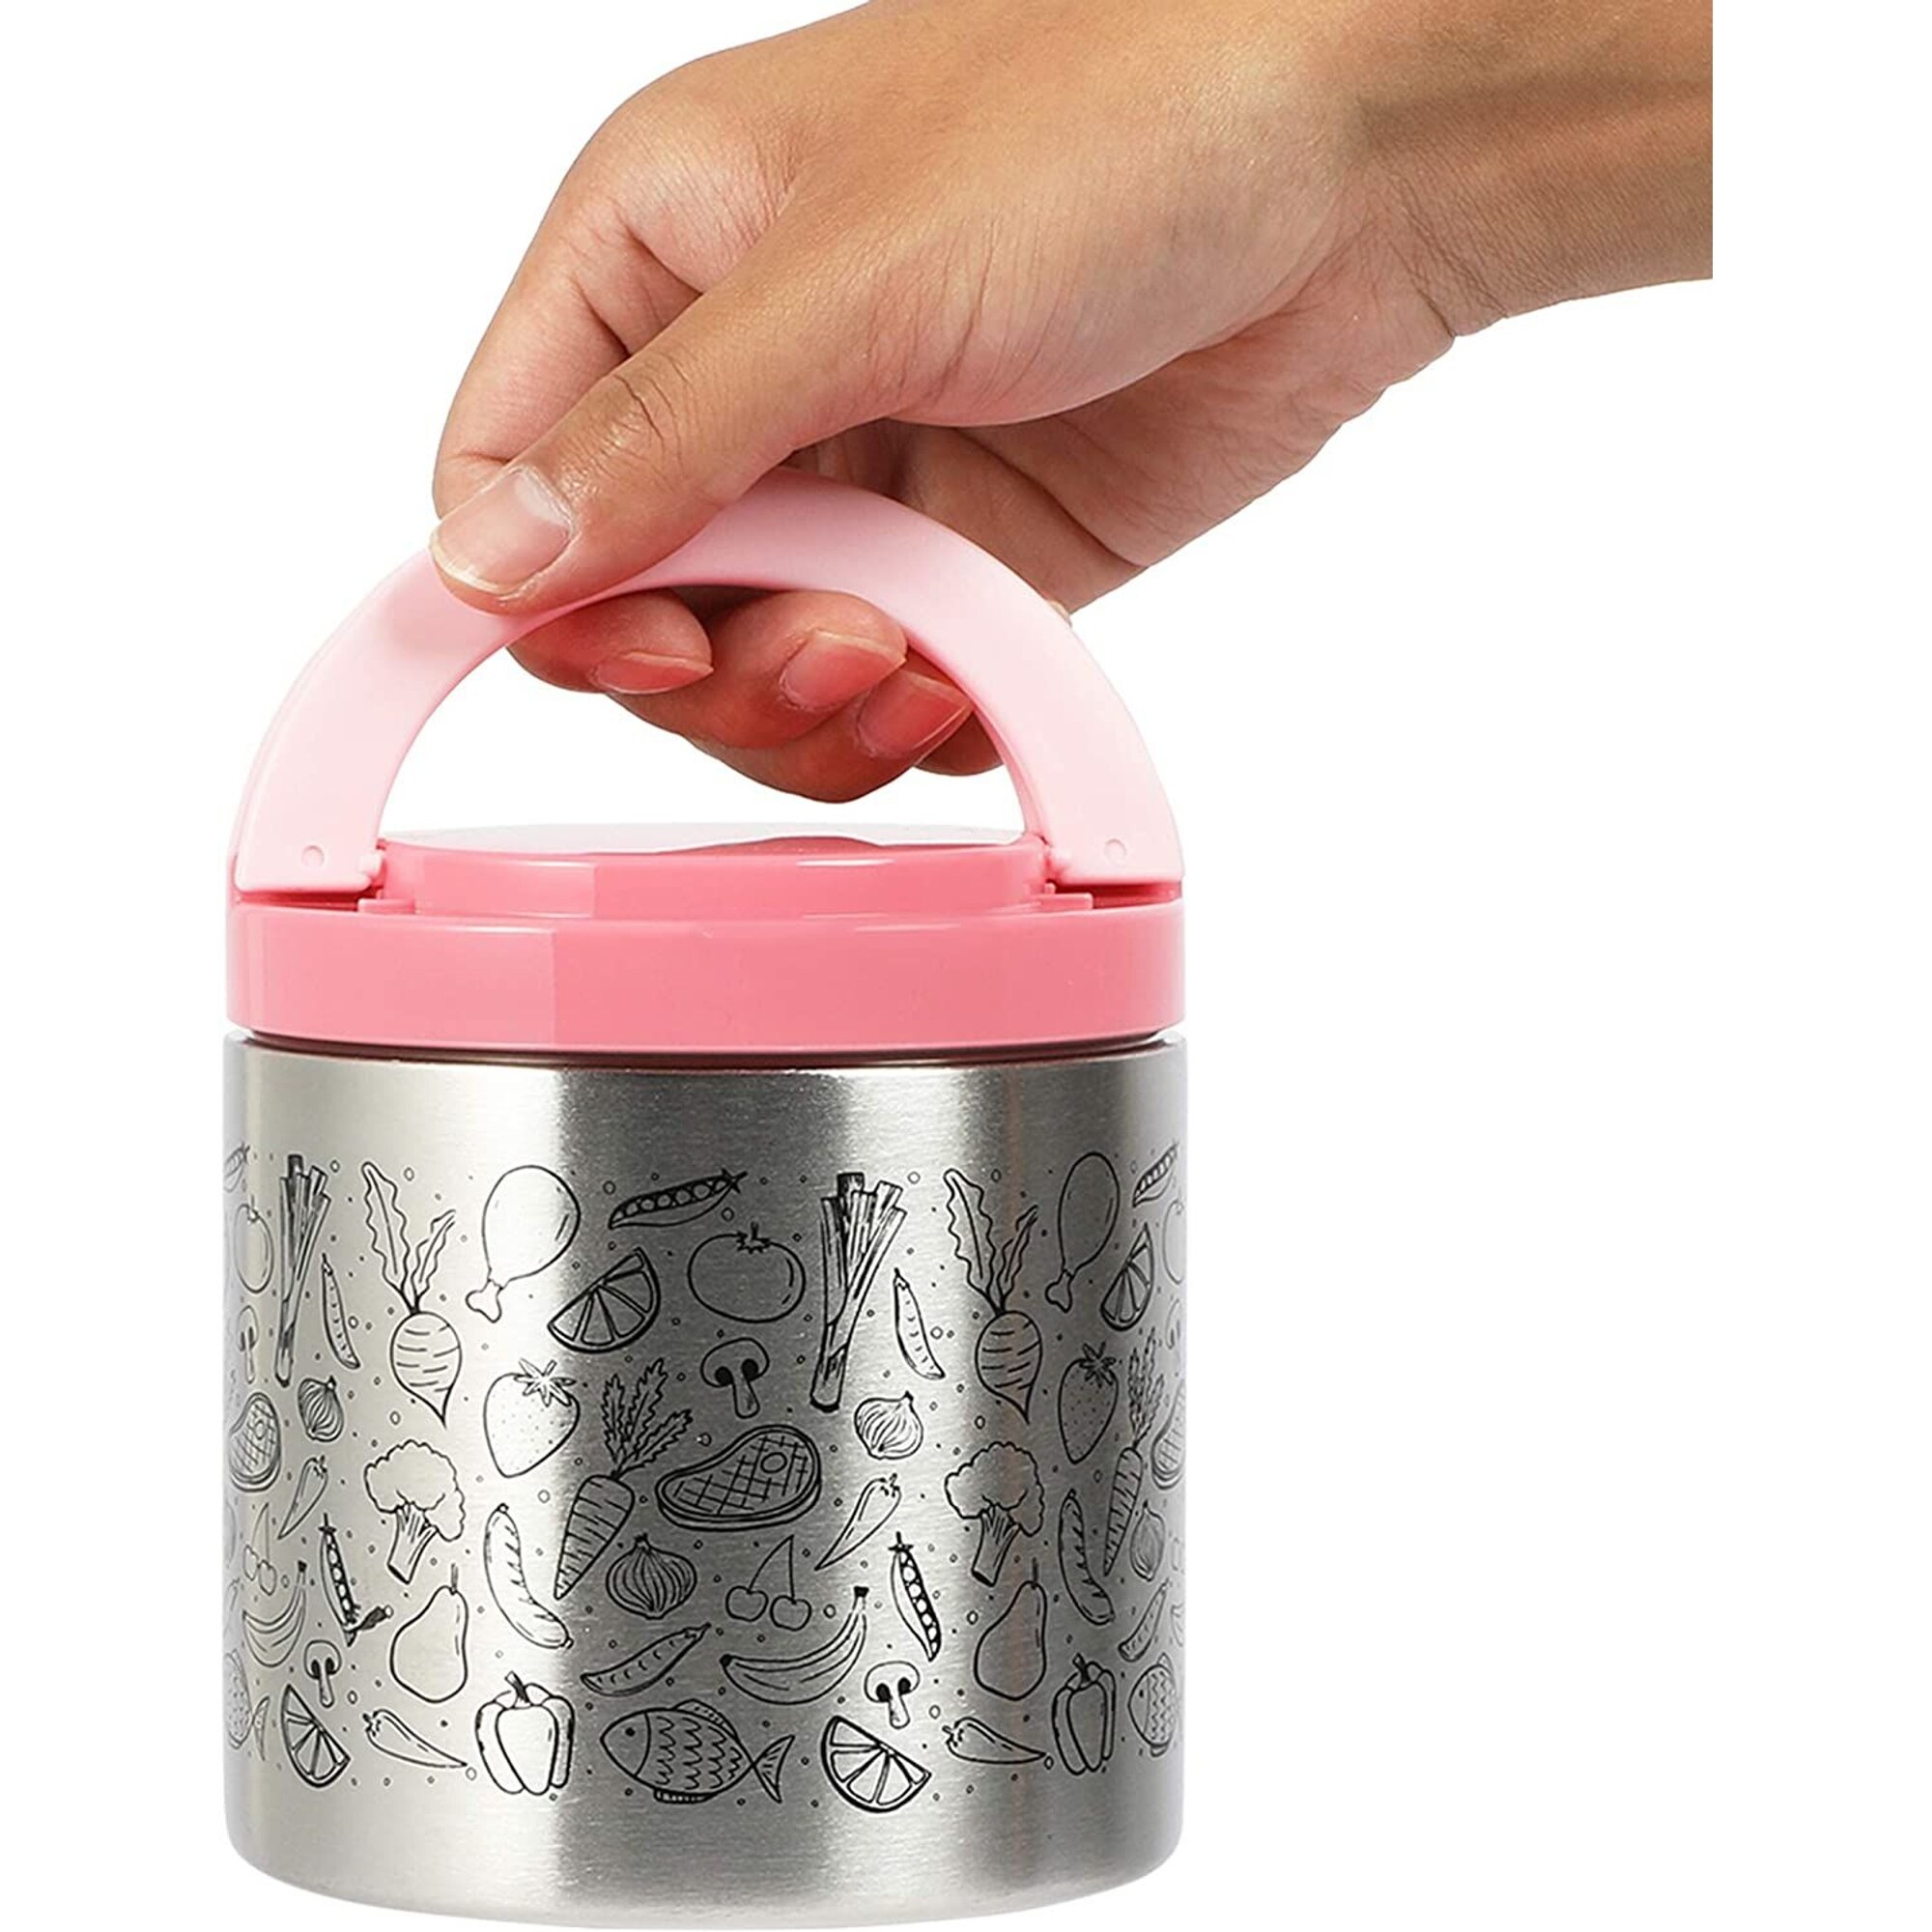 https://ak1.ostkcdn.com/images/products/is/images/direct/38e1a290a31477f1006d71c54c32b9819cc86970/Insulated-Lunch-Container-with-Handles-%2822-oz%2C-Pink%29.jpg